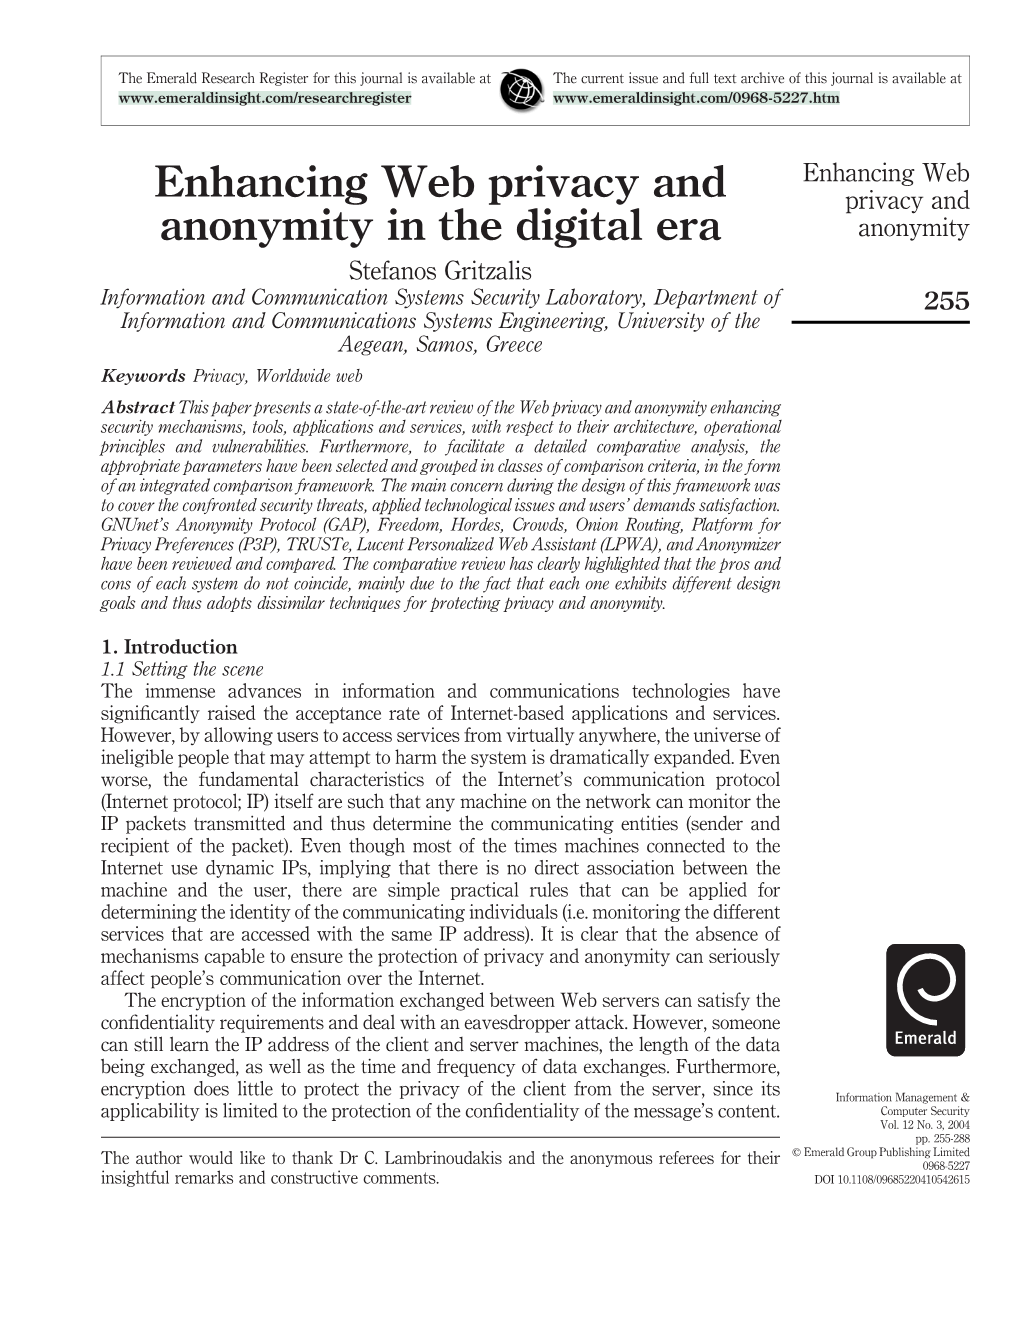 Enhancing Web Privacy and Anonymity in the Digital